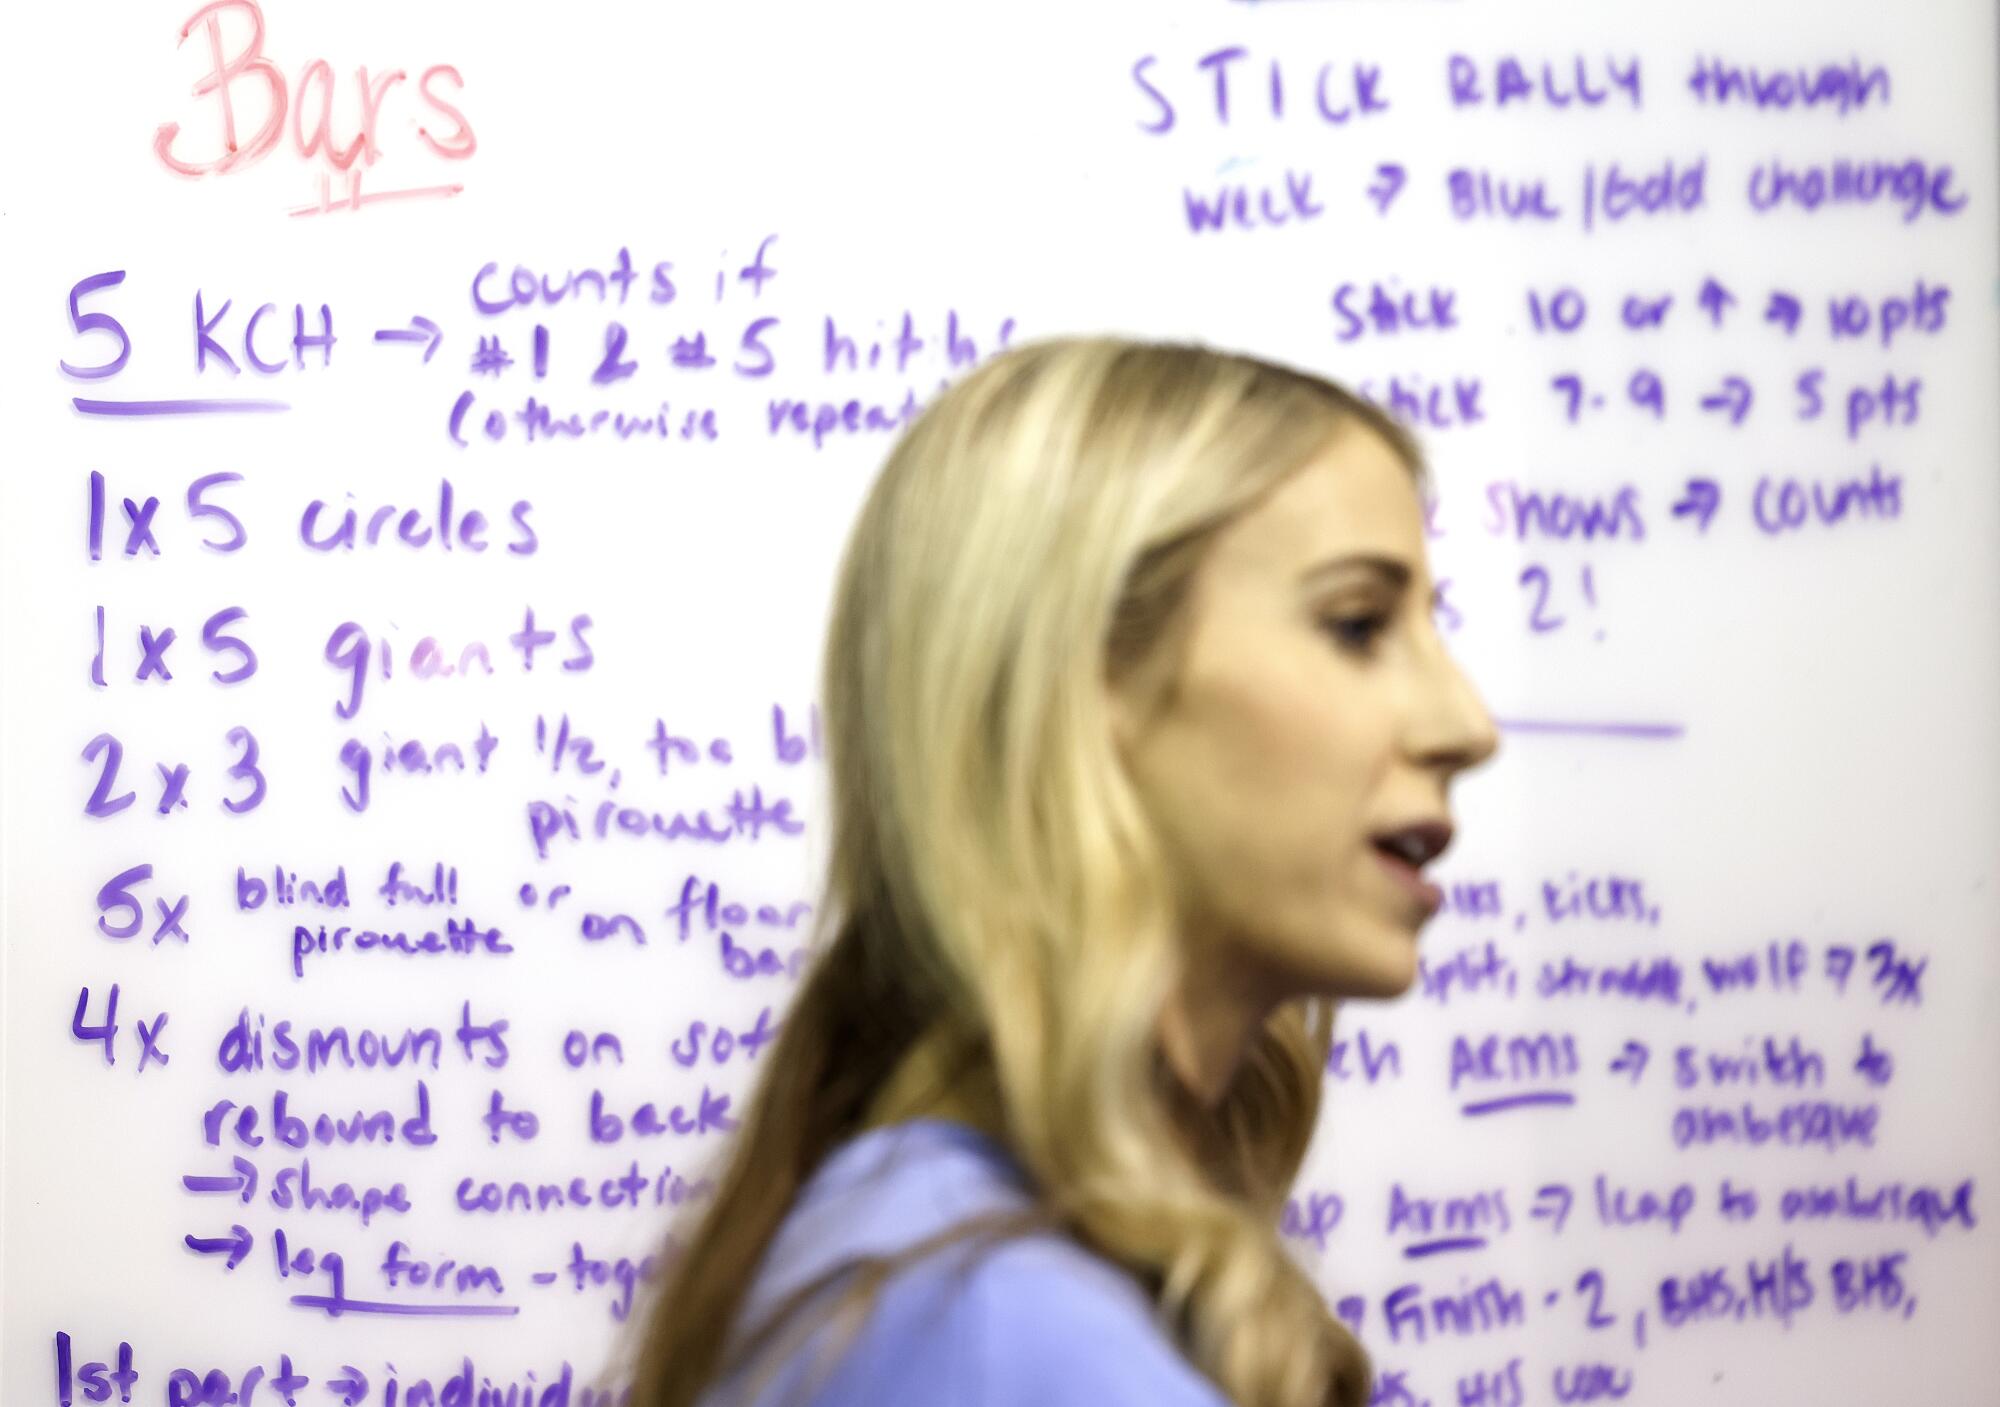 Autumn Grable stands in front a white board covered in details about the day's workout.